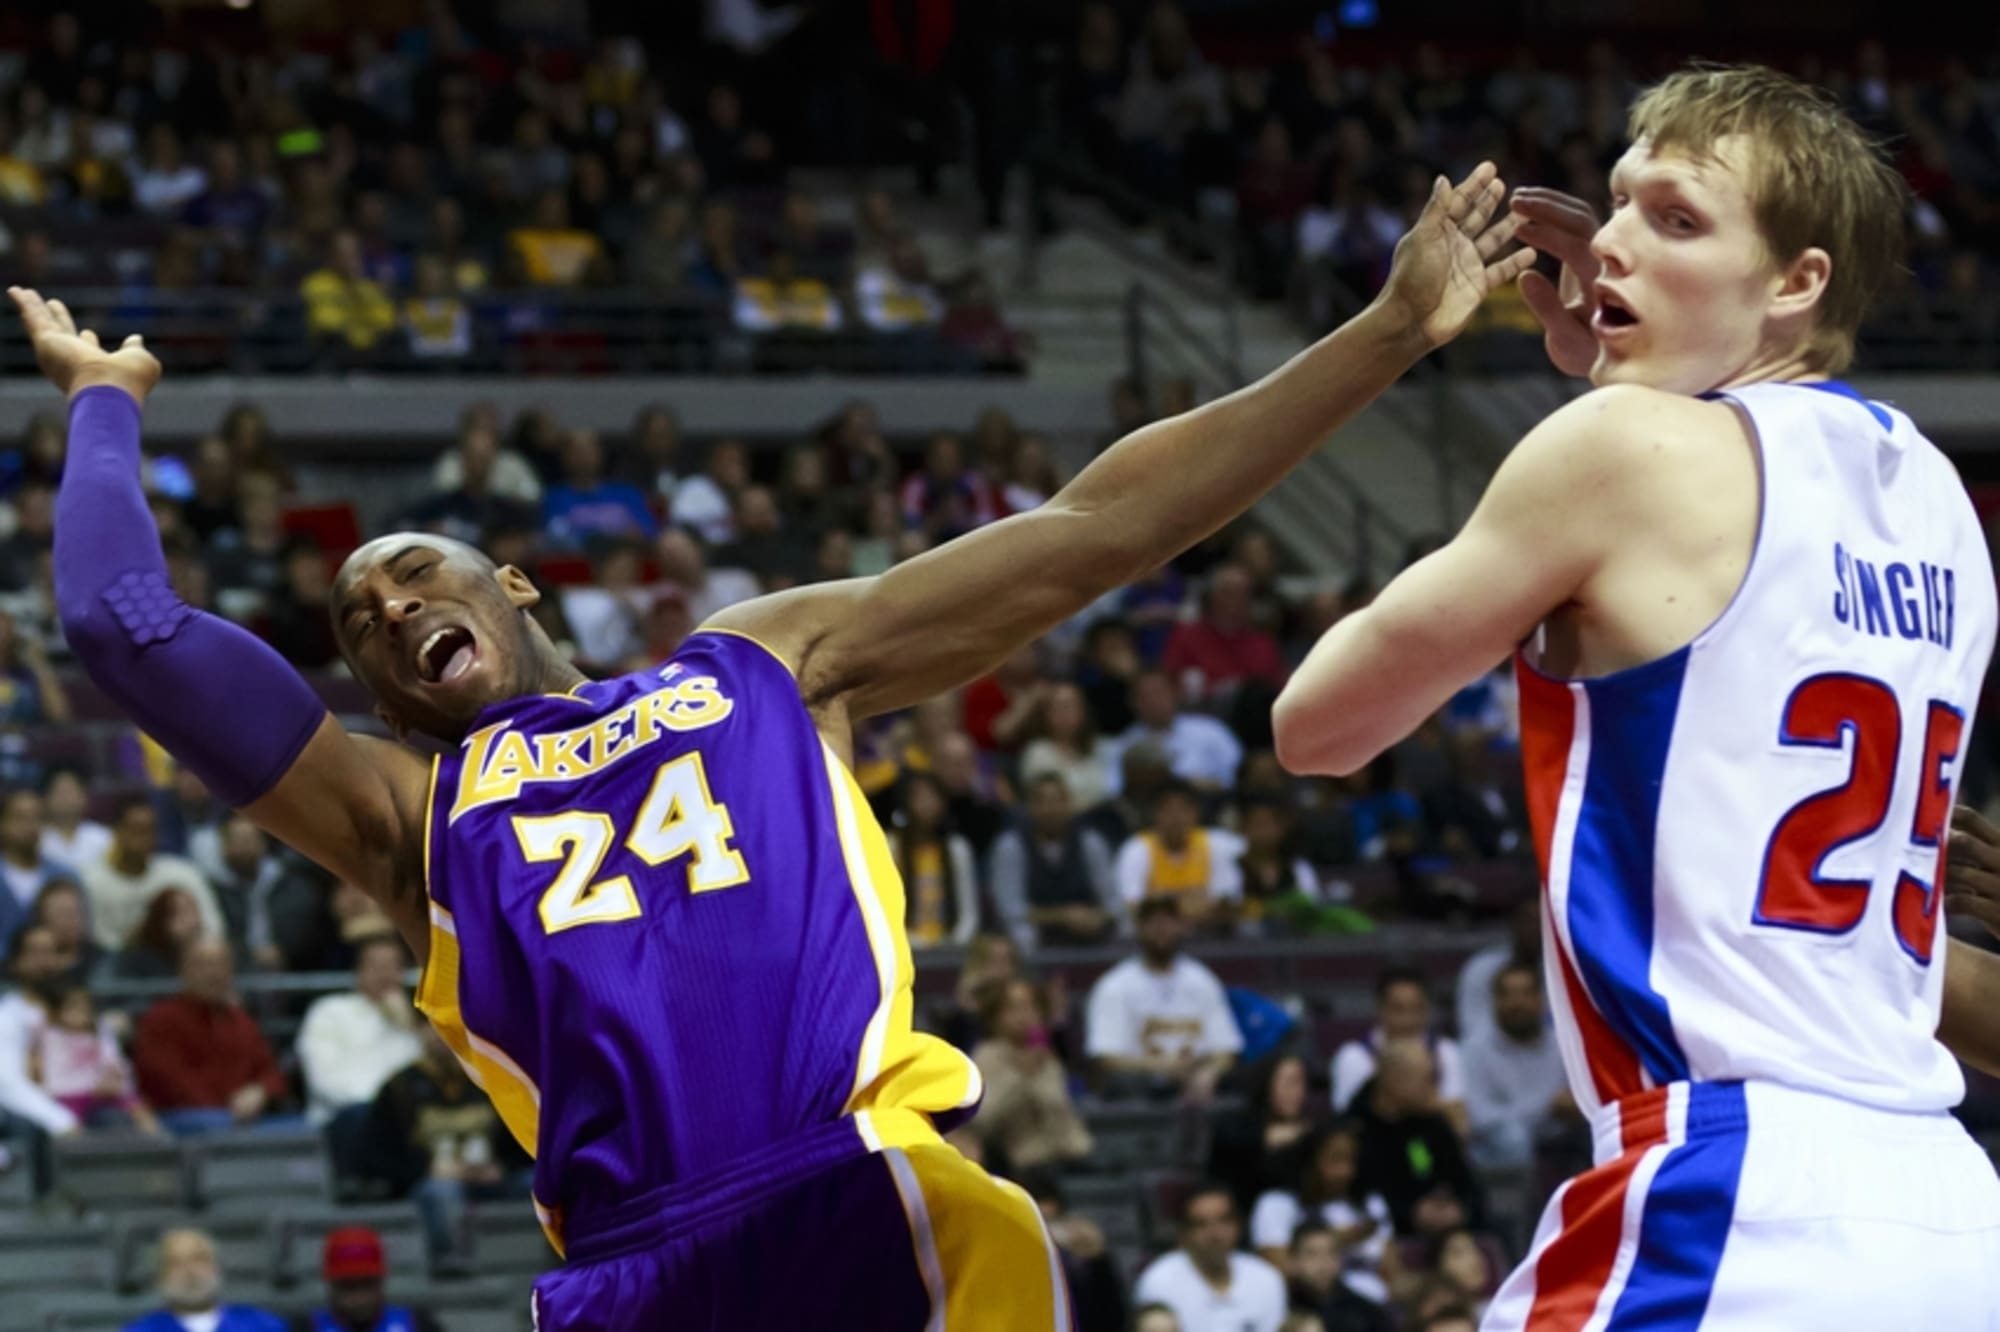 Los Angeles Lakers shooting guard Kobe Bryant (24) during the game